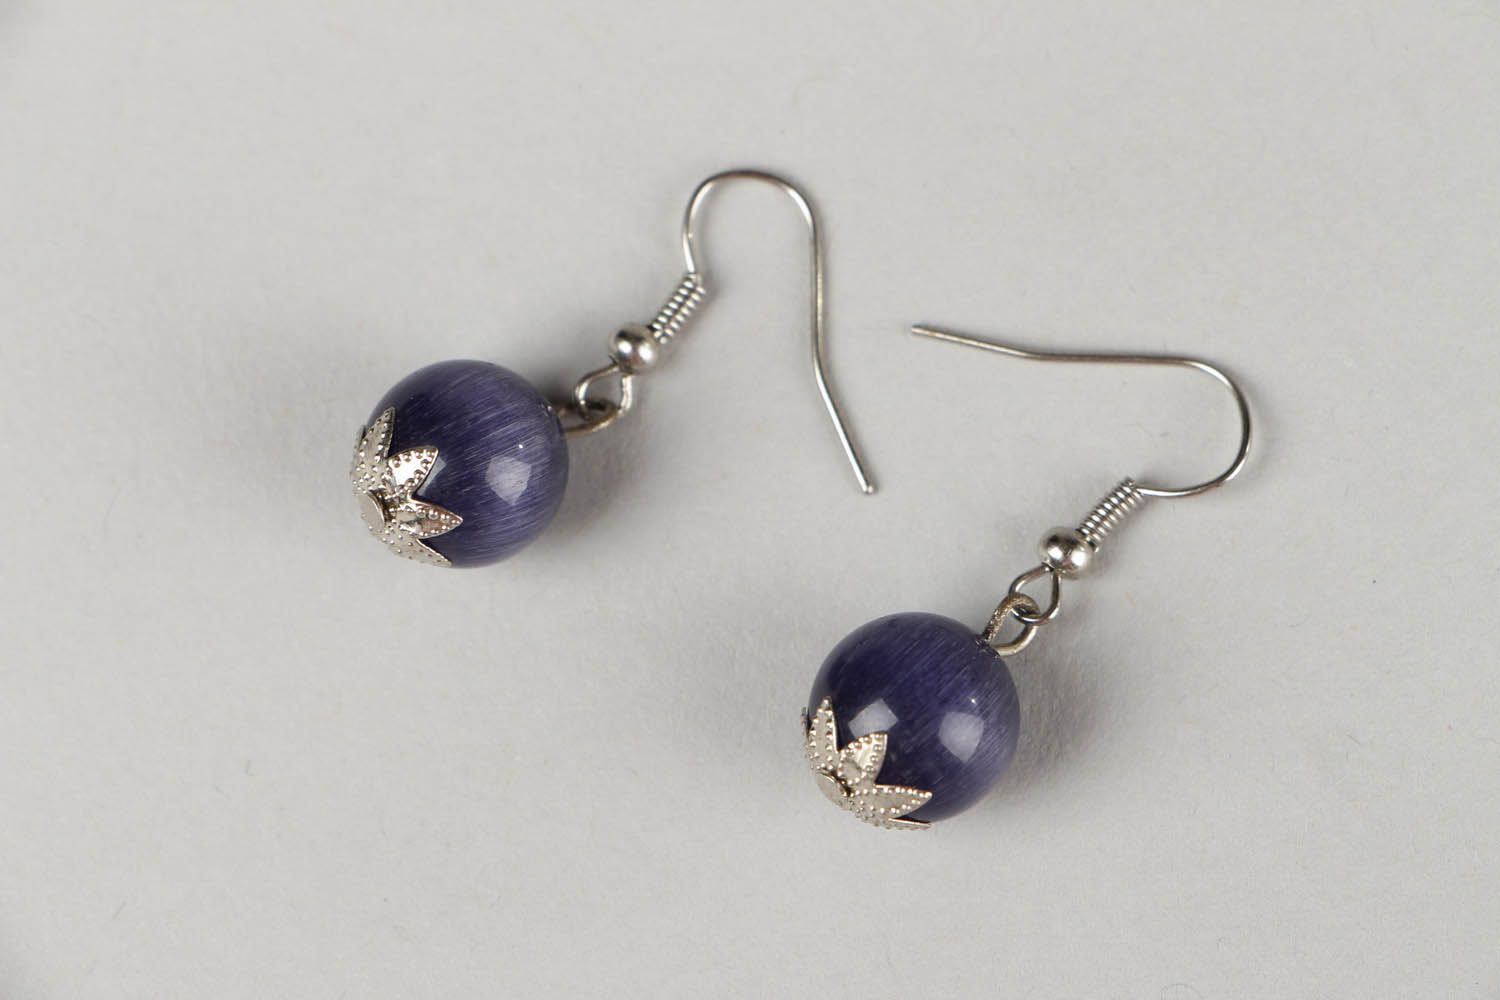 Earrings with natural cat's eye stone photo 1